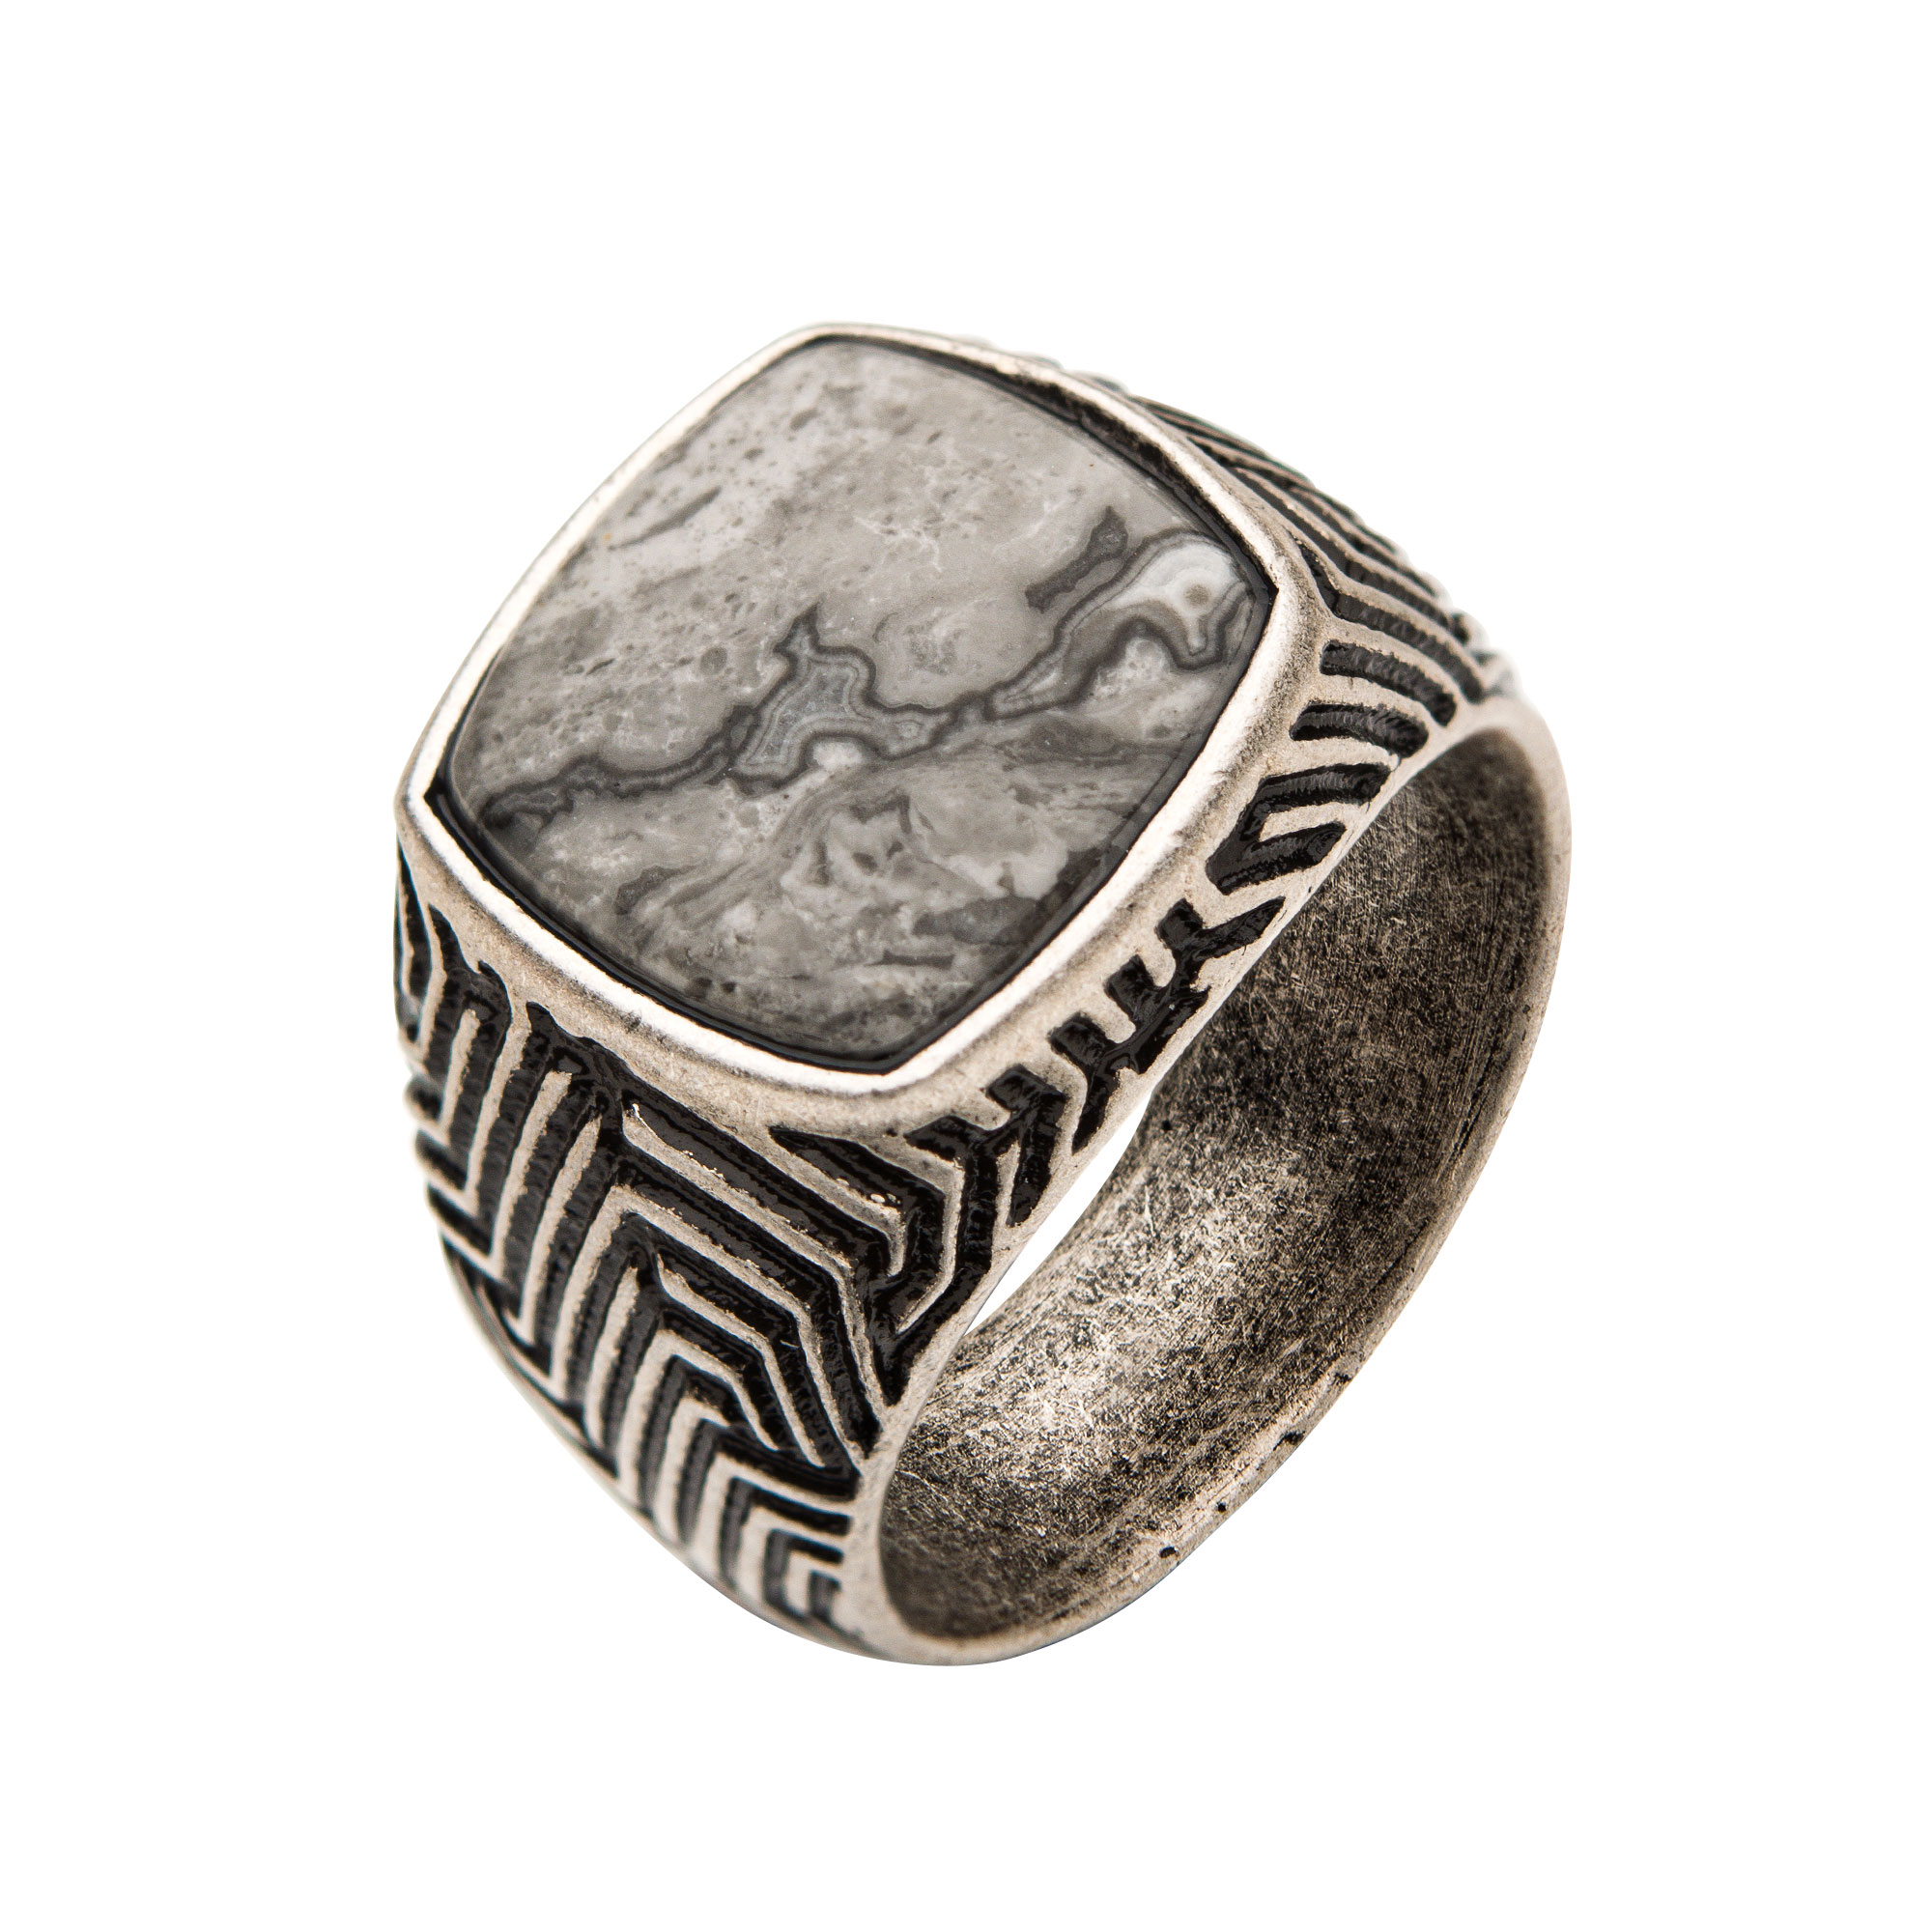 Stainless Steel Silver Plated with Gray Jasper Stone Ring Ken Walker Jewelers Gig Harbor, WA